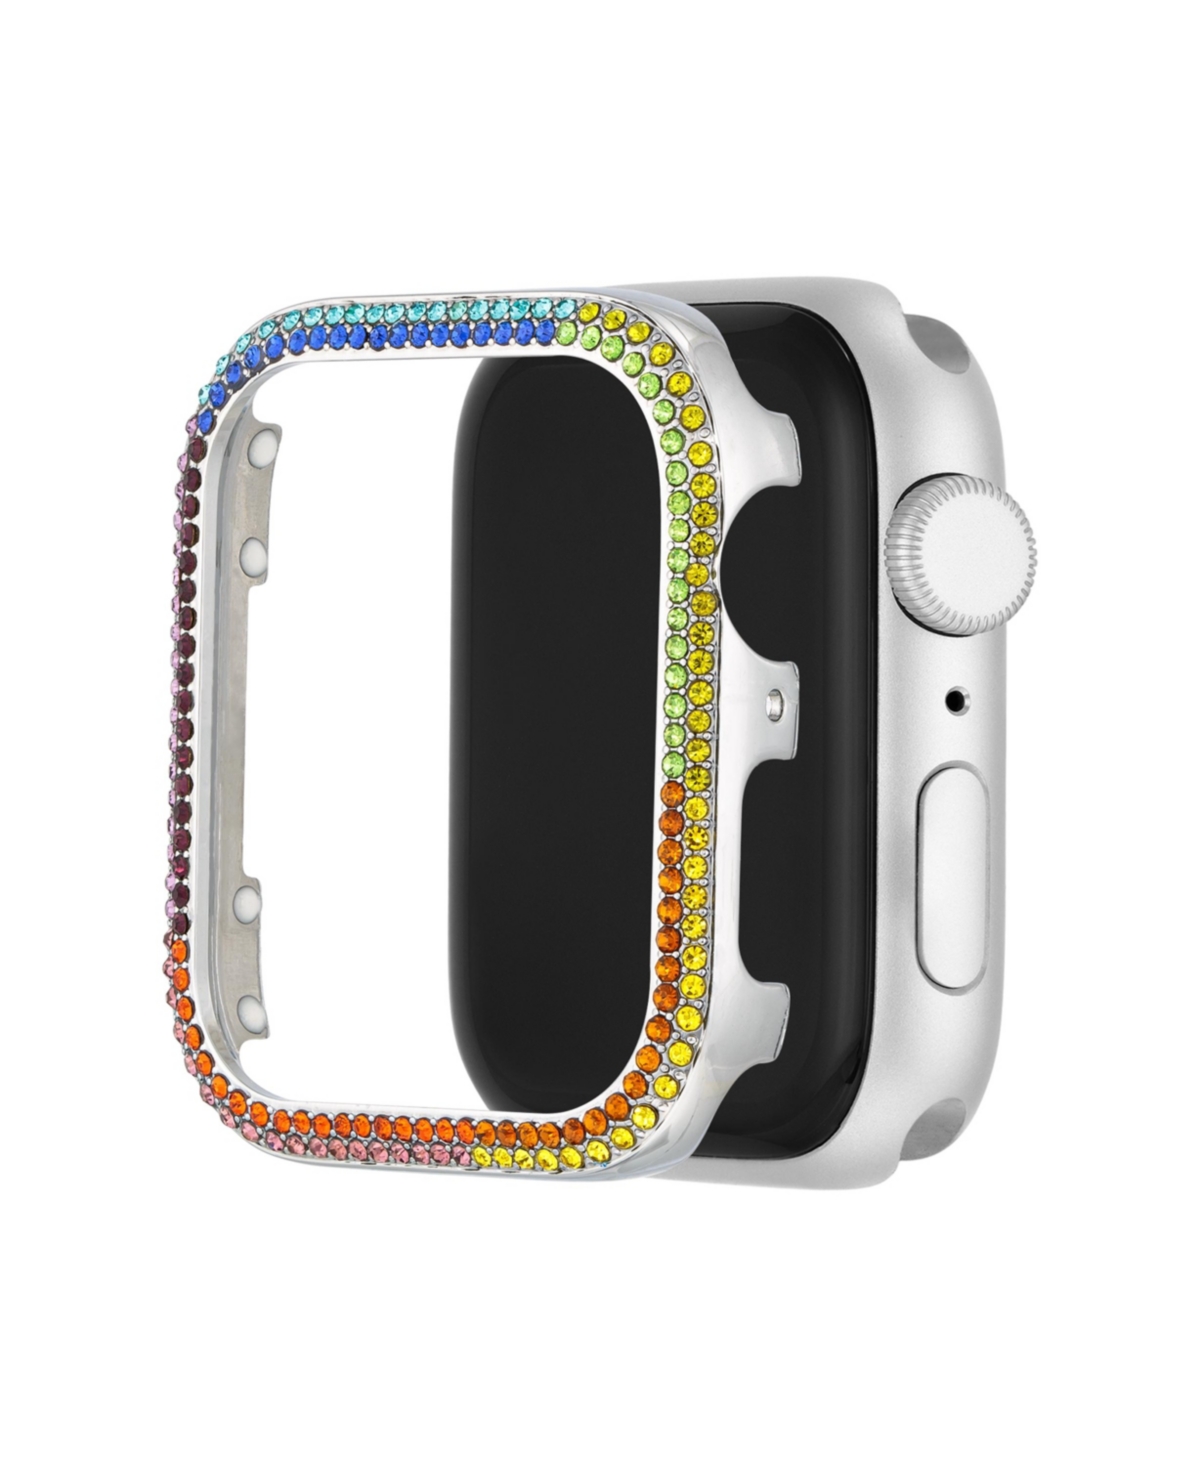 Women's Mixed Metal Apple Watch Bumper Accented with Rainbow Crystals, 40mm - Silver